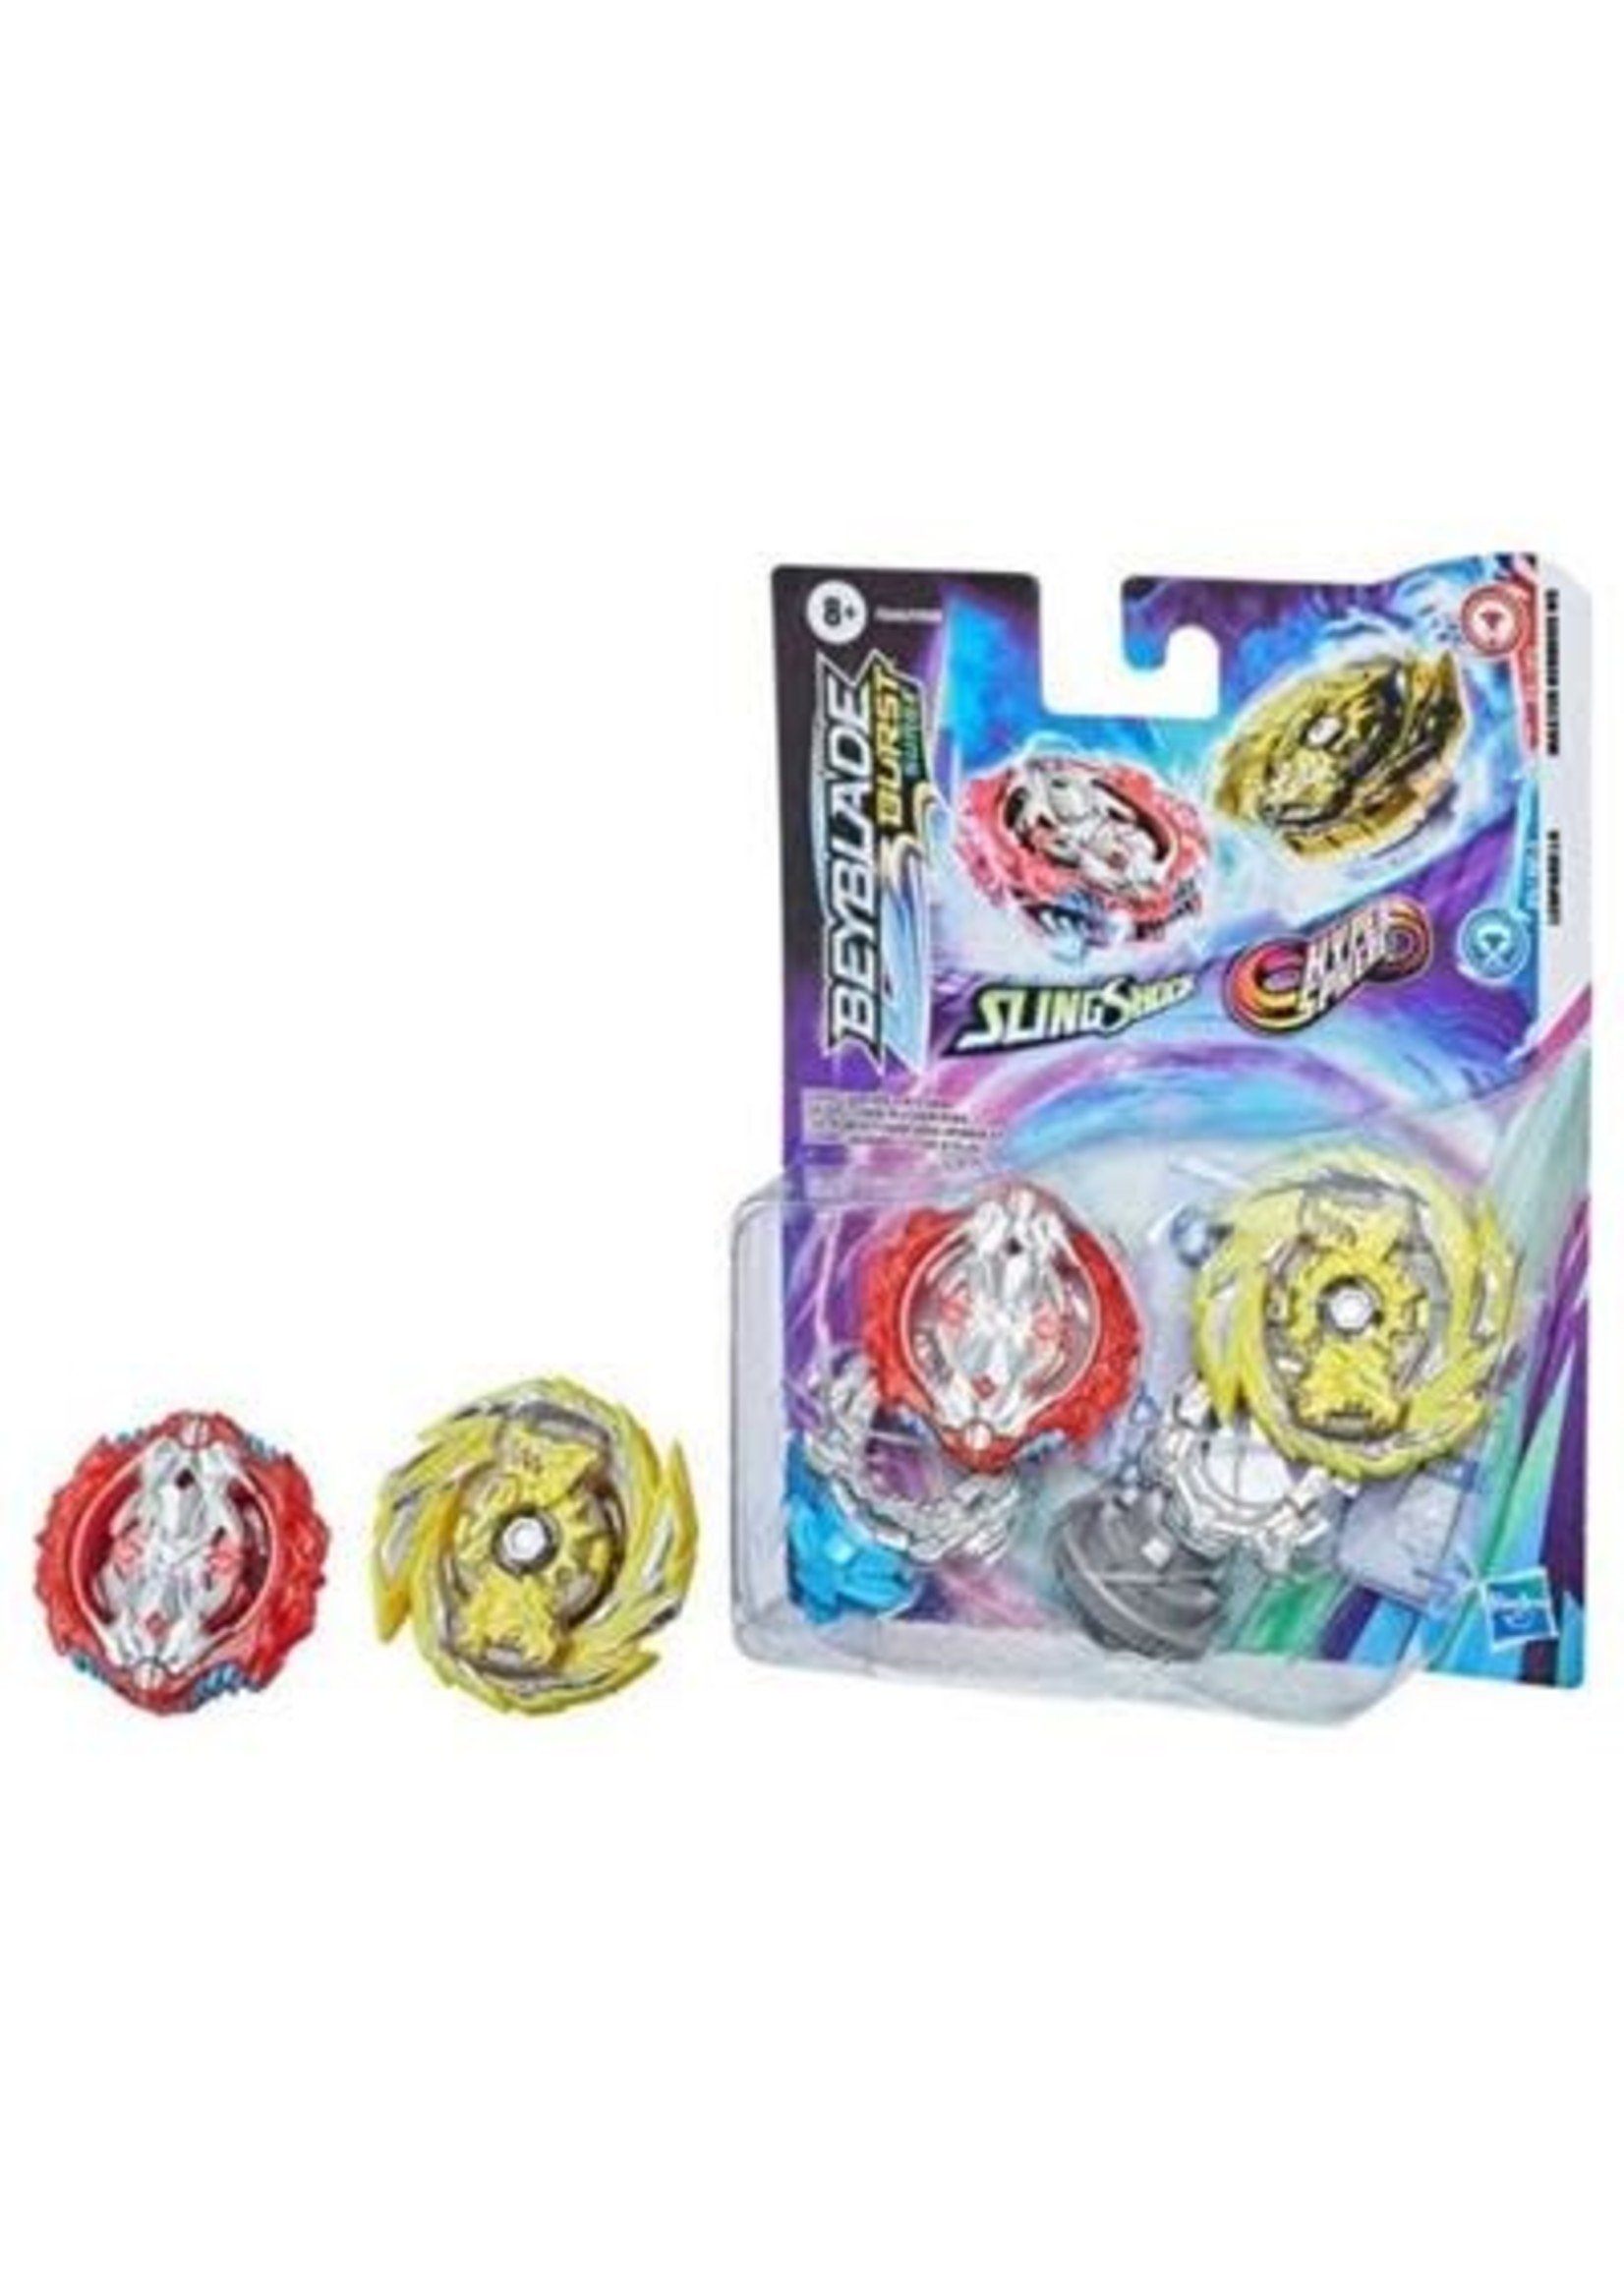 BEYBLADE SPEEDSTORM DUAL COLLECTION PACK